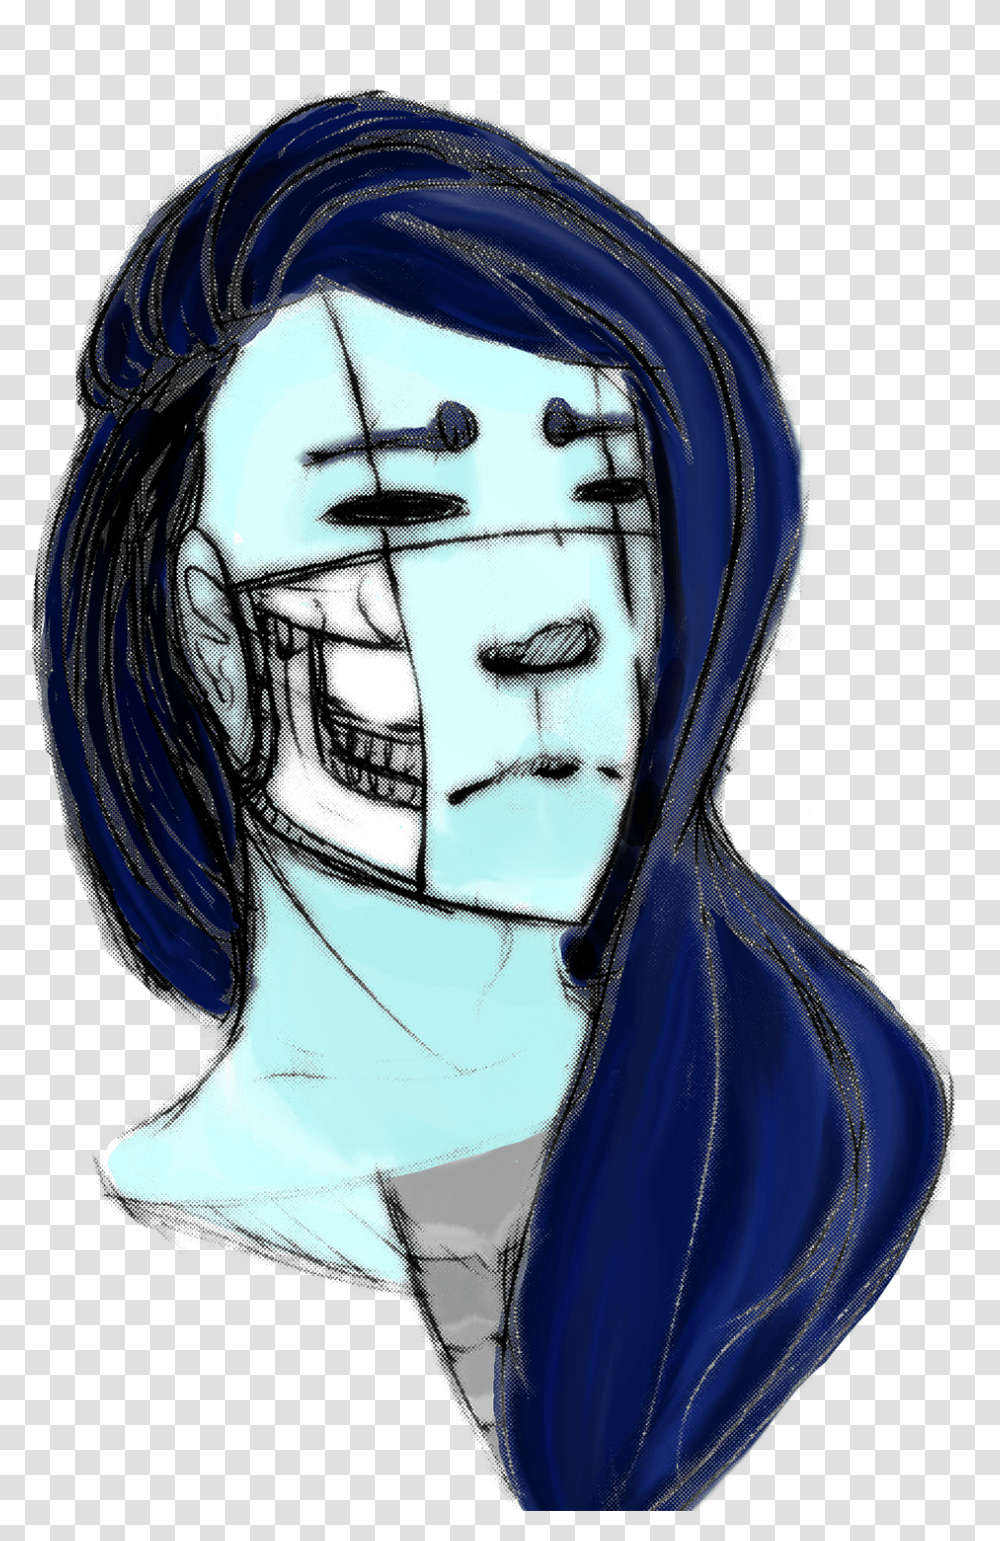 The Head And Neck Of A Blue Man With Long Hair Sketch Transparent Png